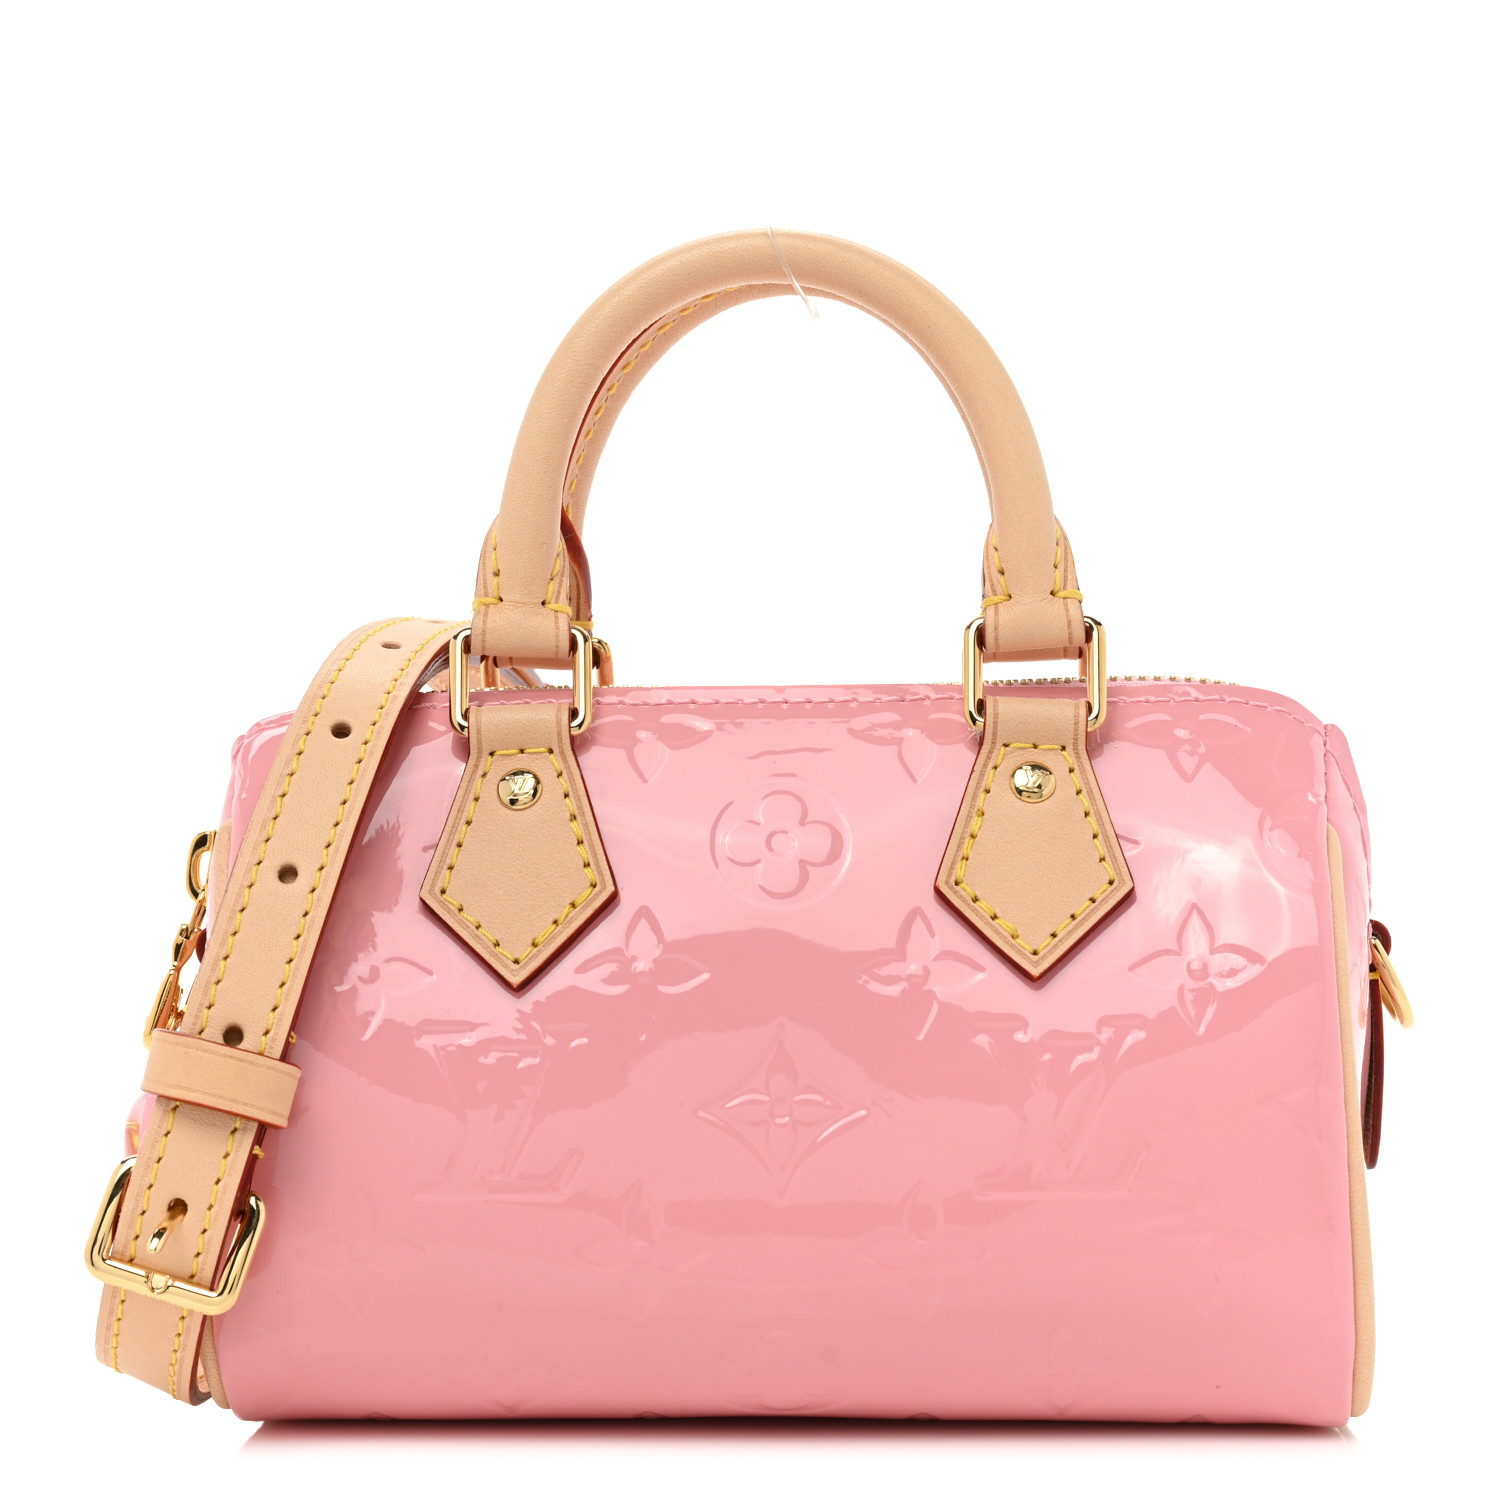 image of LOUIS VUITTON Vernis Monogram Nano Speedy in the color Mochi Pink by FASHIONPHILE